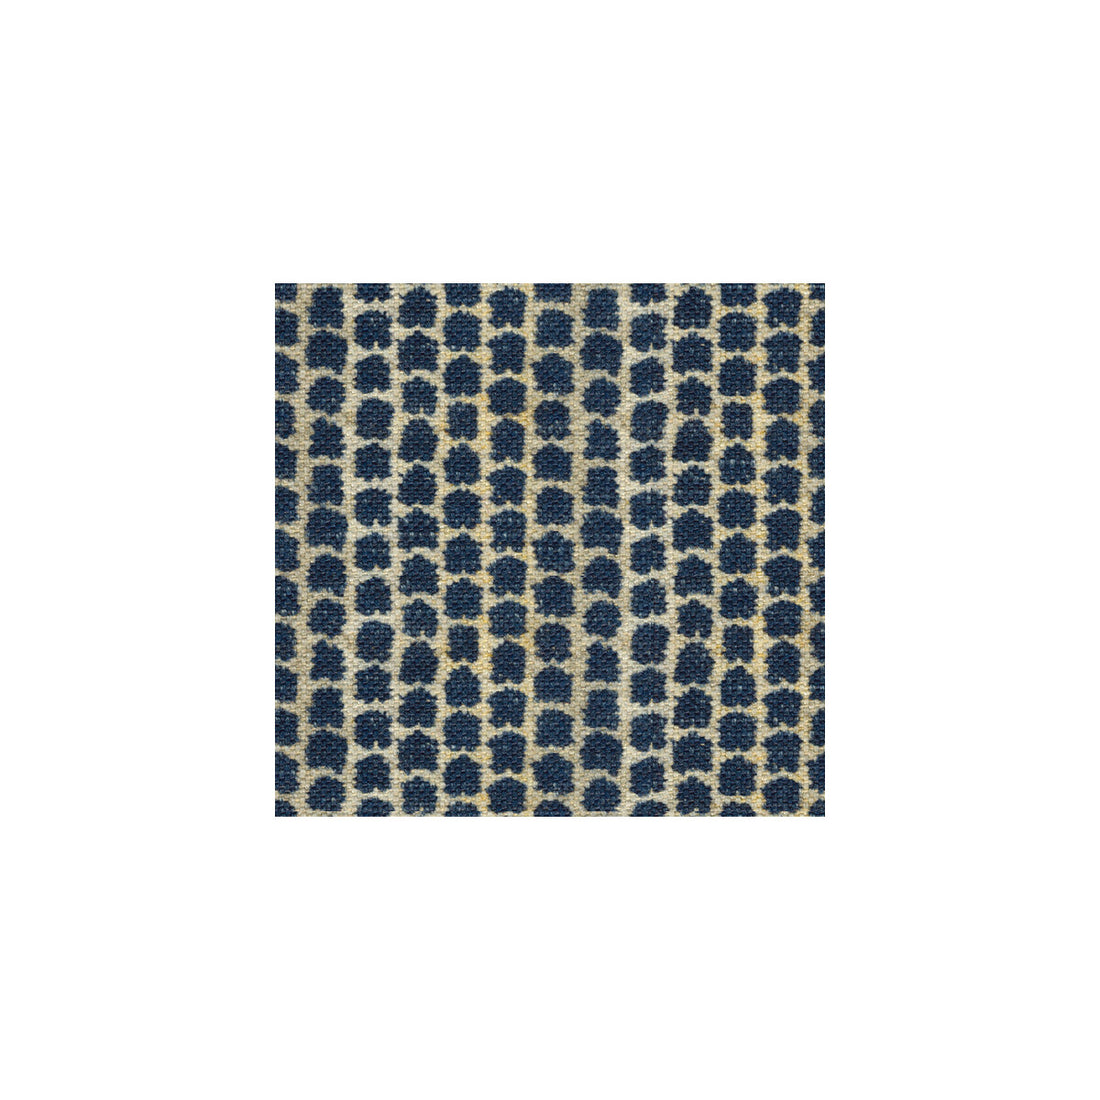 Kaya fabric in indigo color - pattern 2012101.50.0 - by Lee Jofa in the The Malika collection